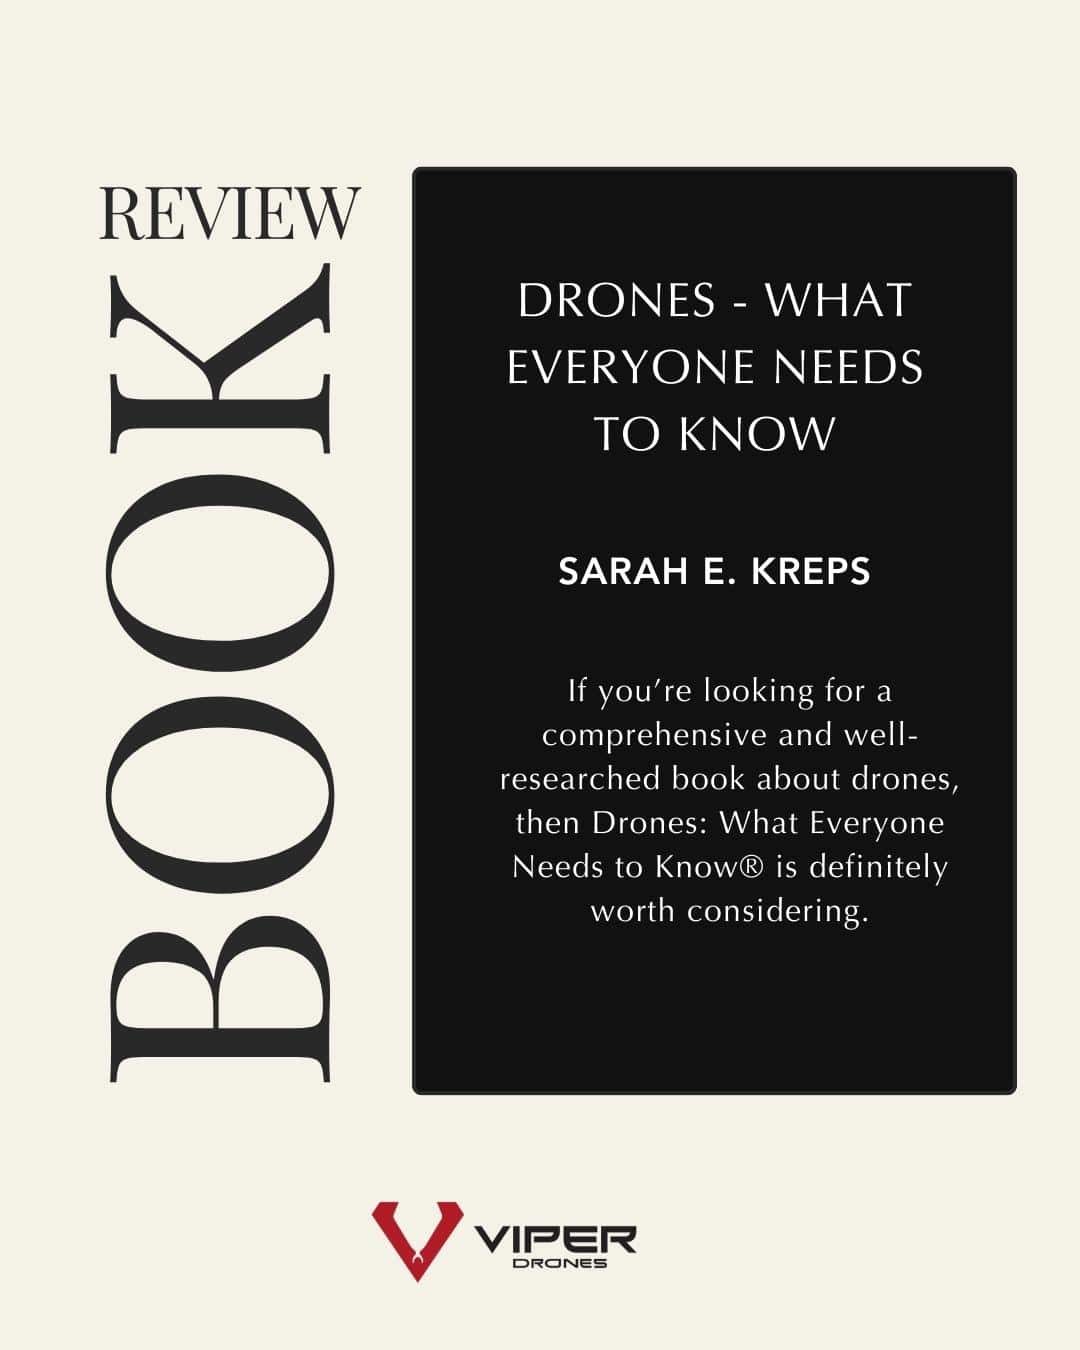 drones what everyone needs to know book review text